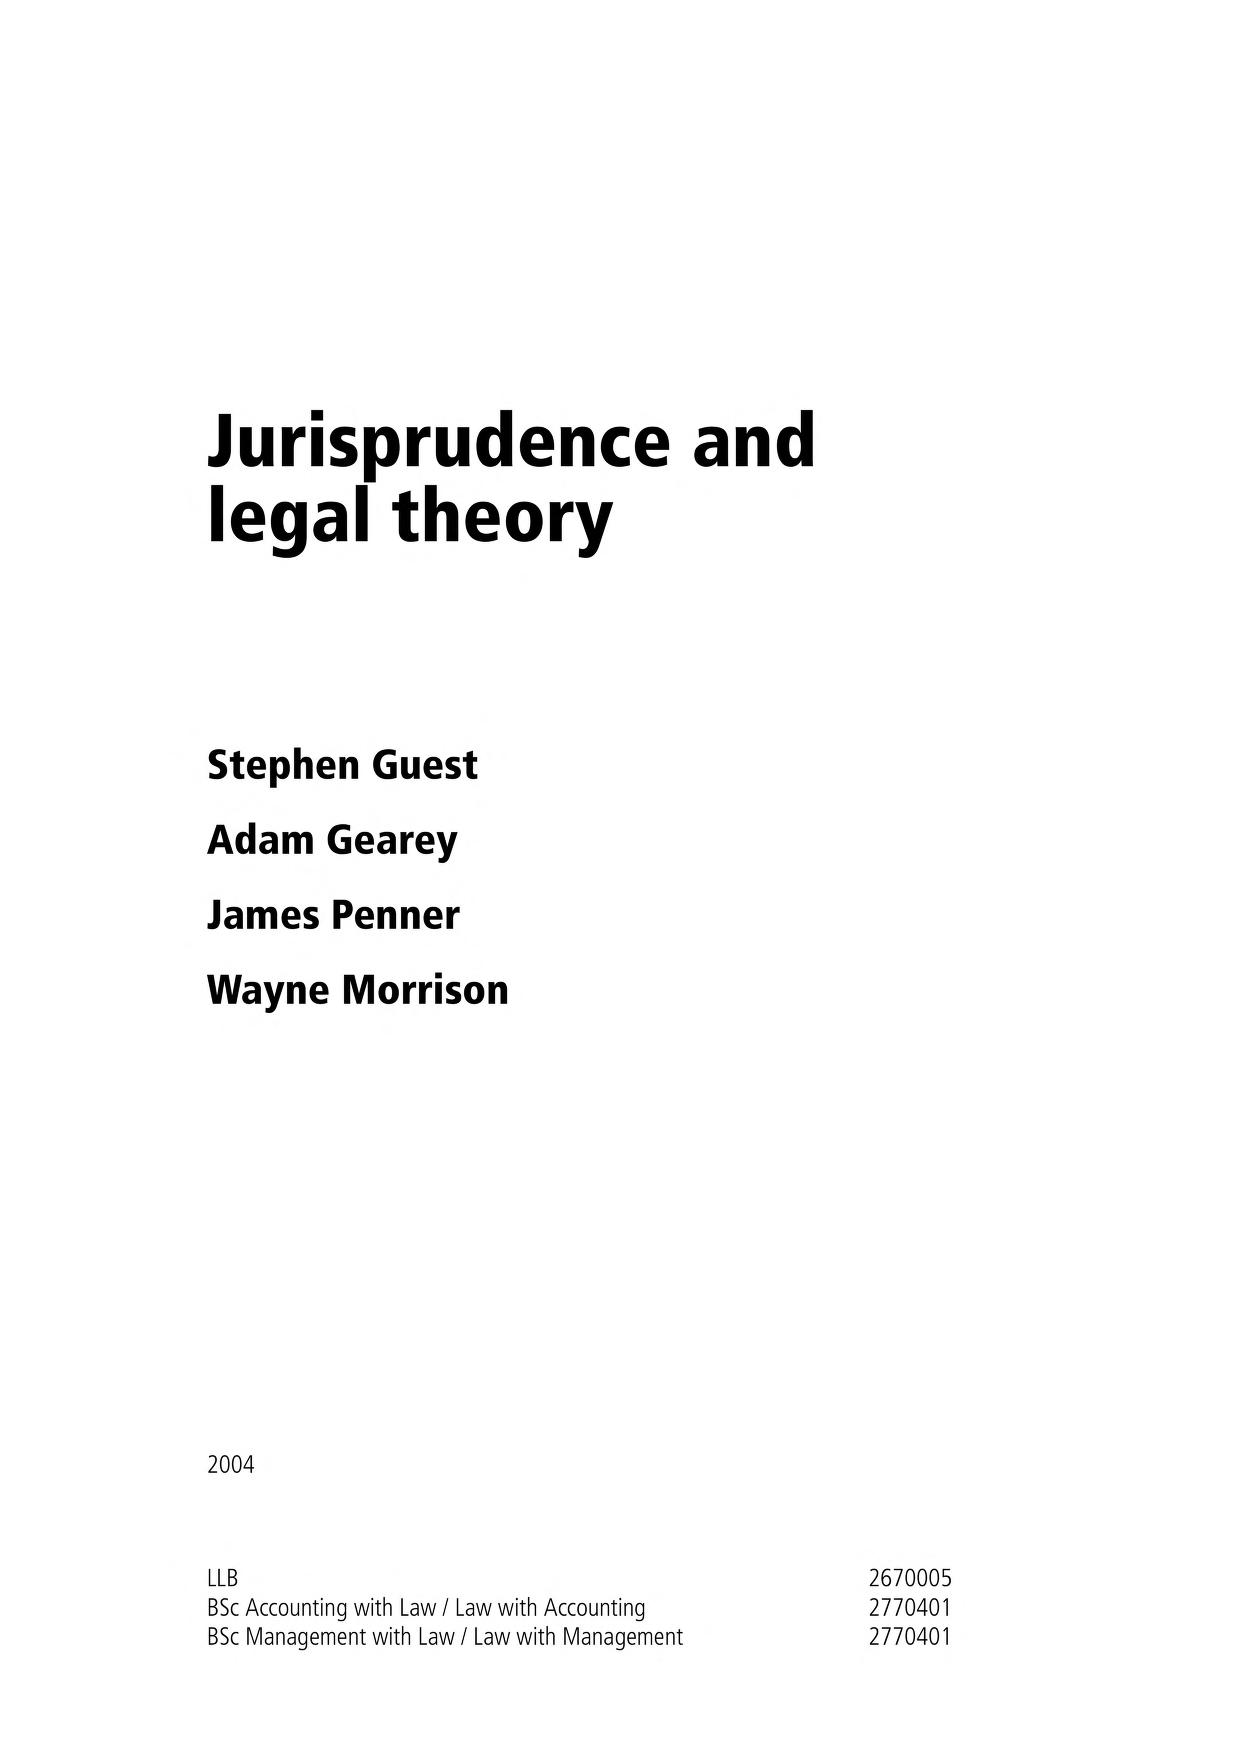 jurisprudence and legal theory pdf free download